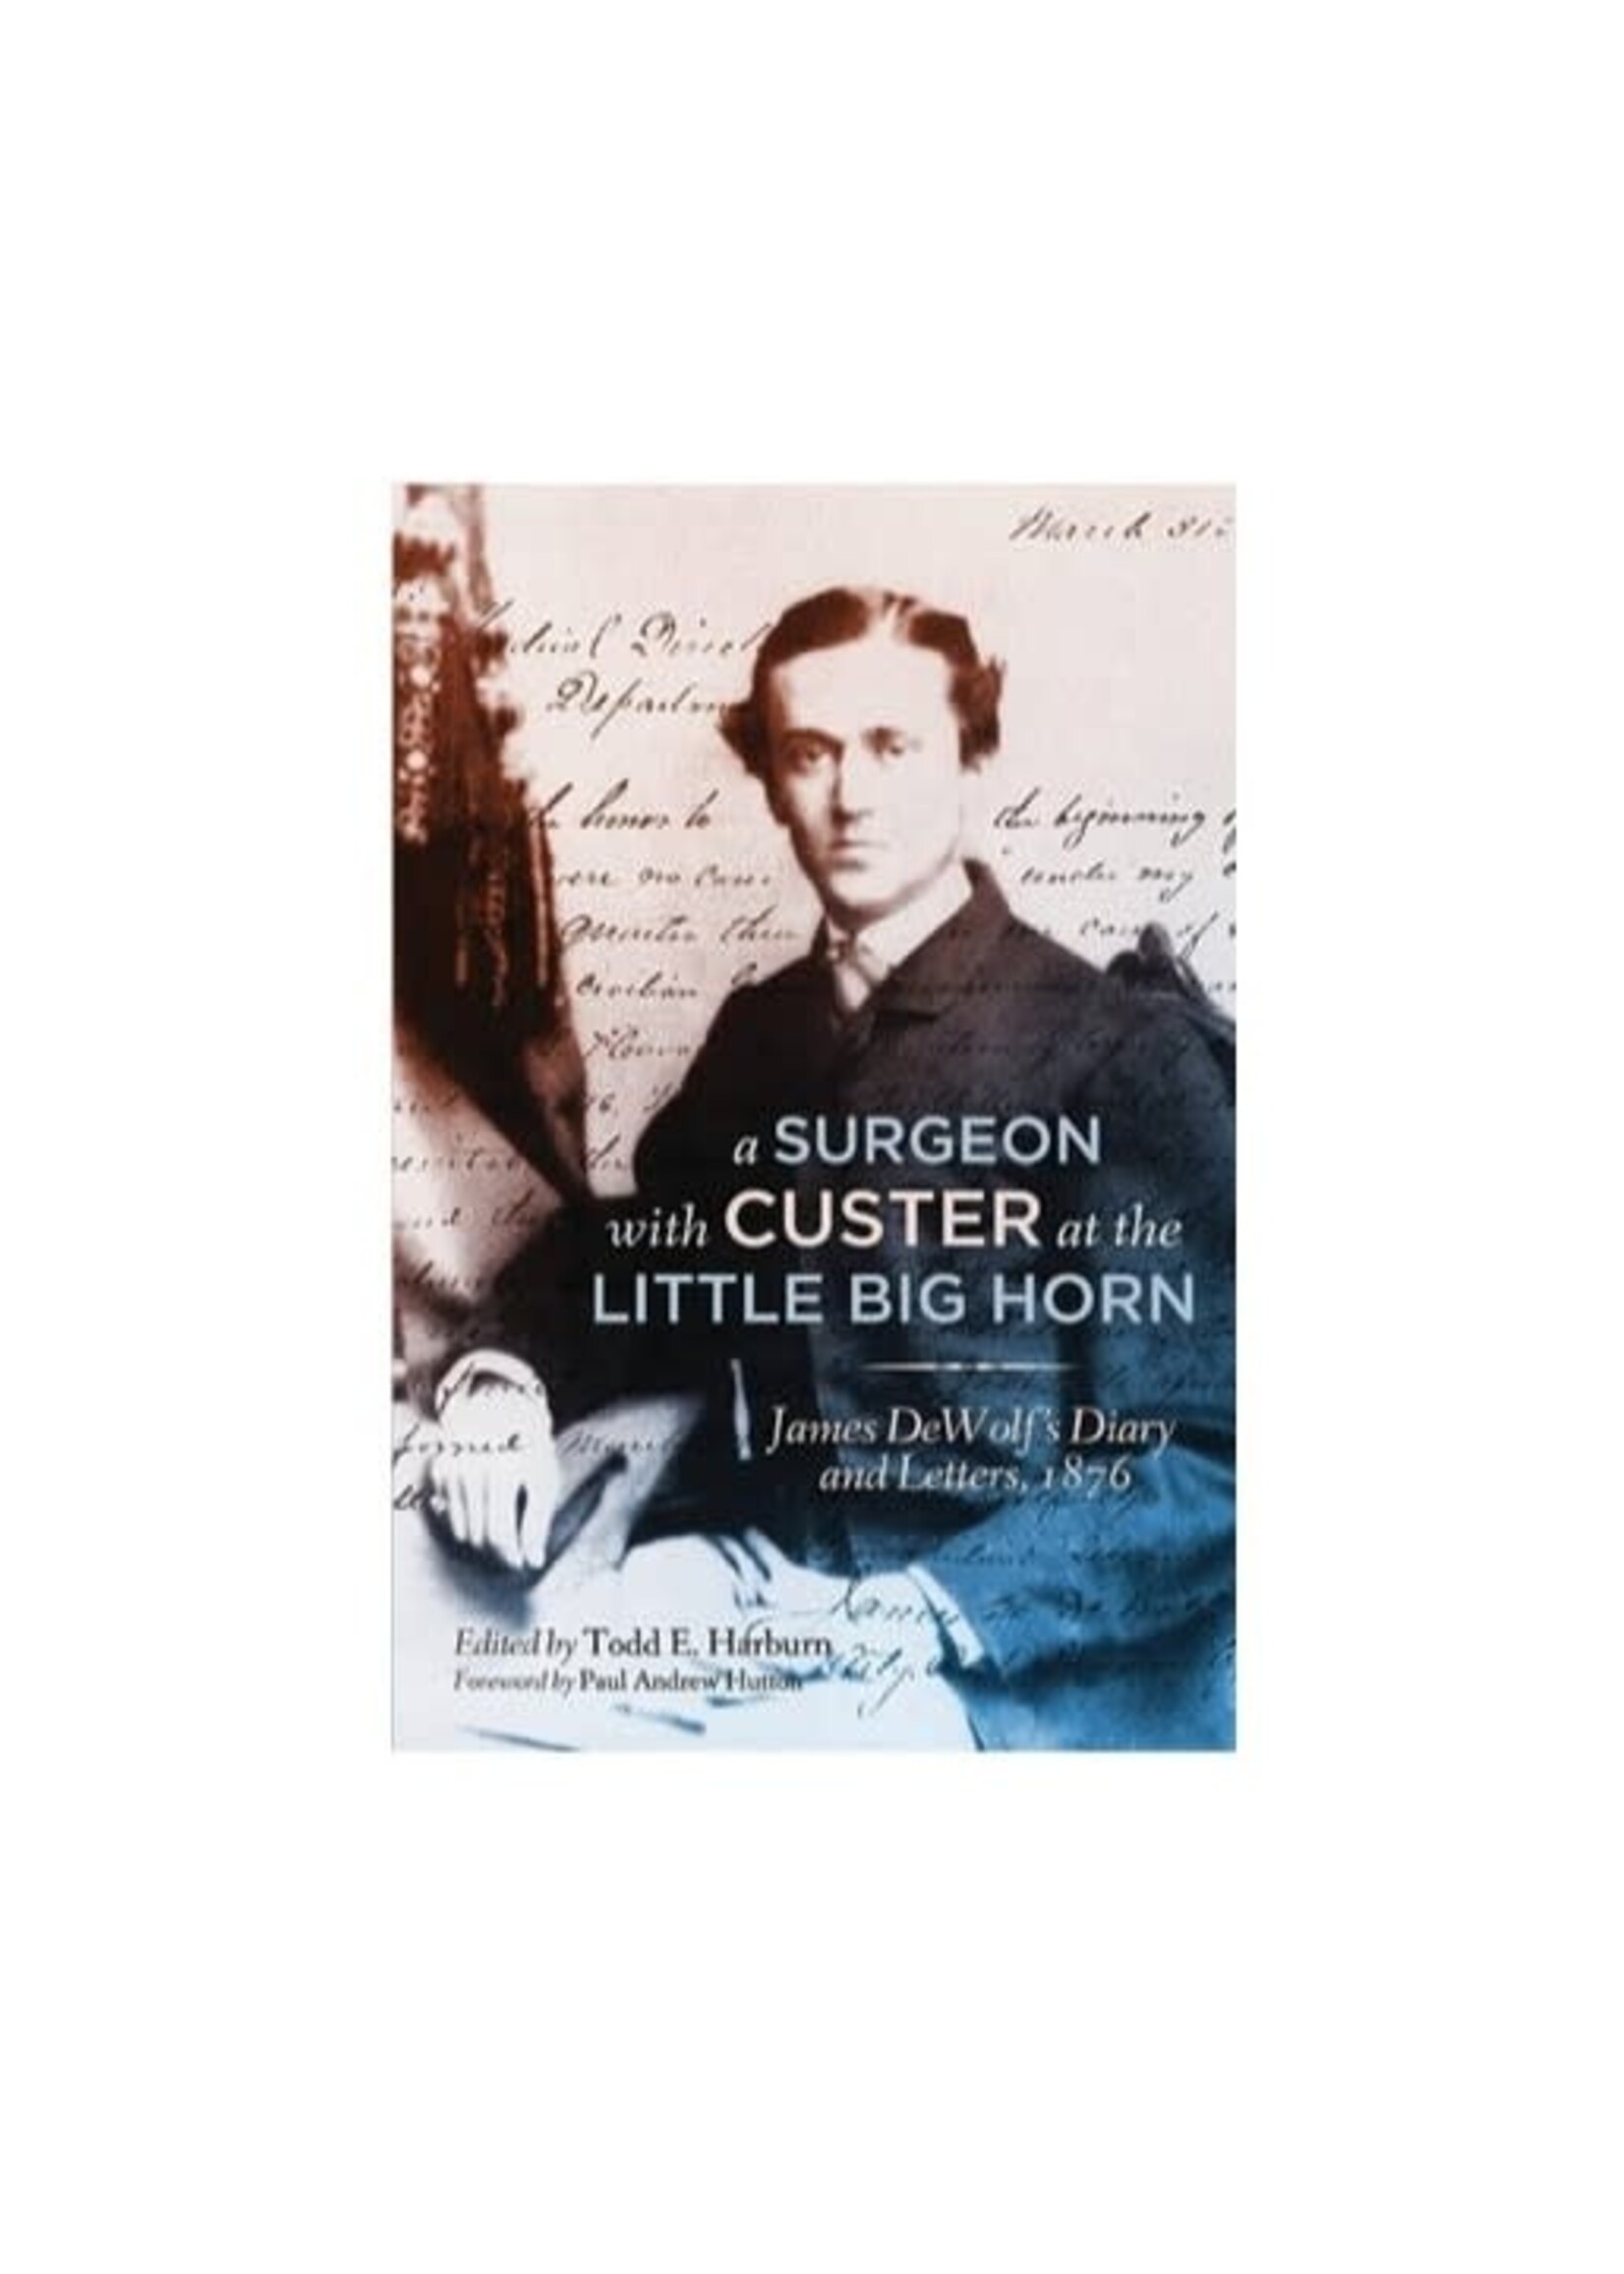 A Surgeon with Custer at the Little Big Horn: James DeWolf's Diary and Letters, 1876 Paperback